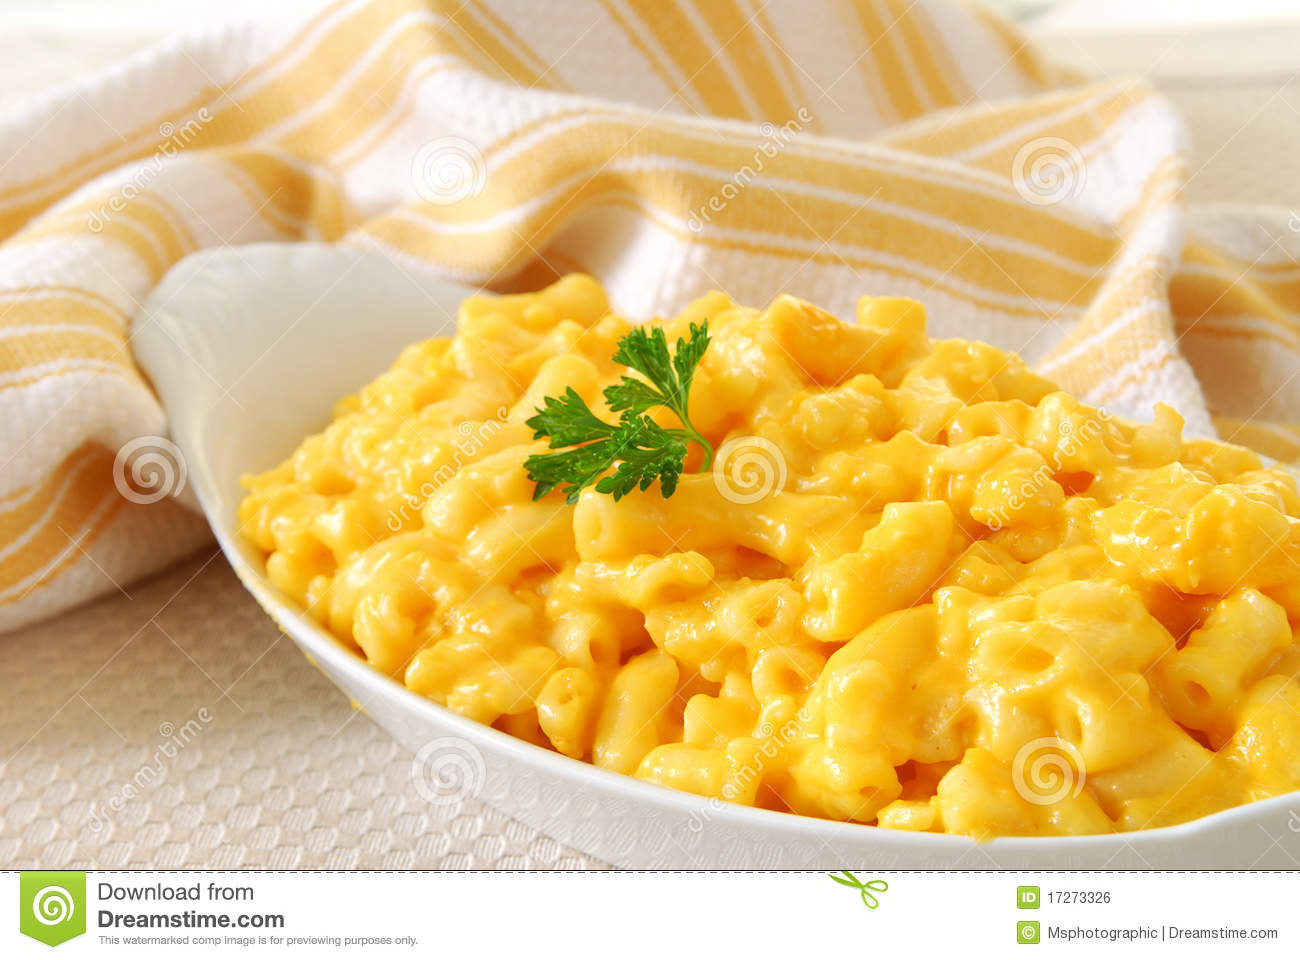 Bowl Of Macaroni And Cheese Royalty Free Stock Image   Image  17273326